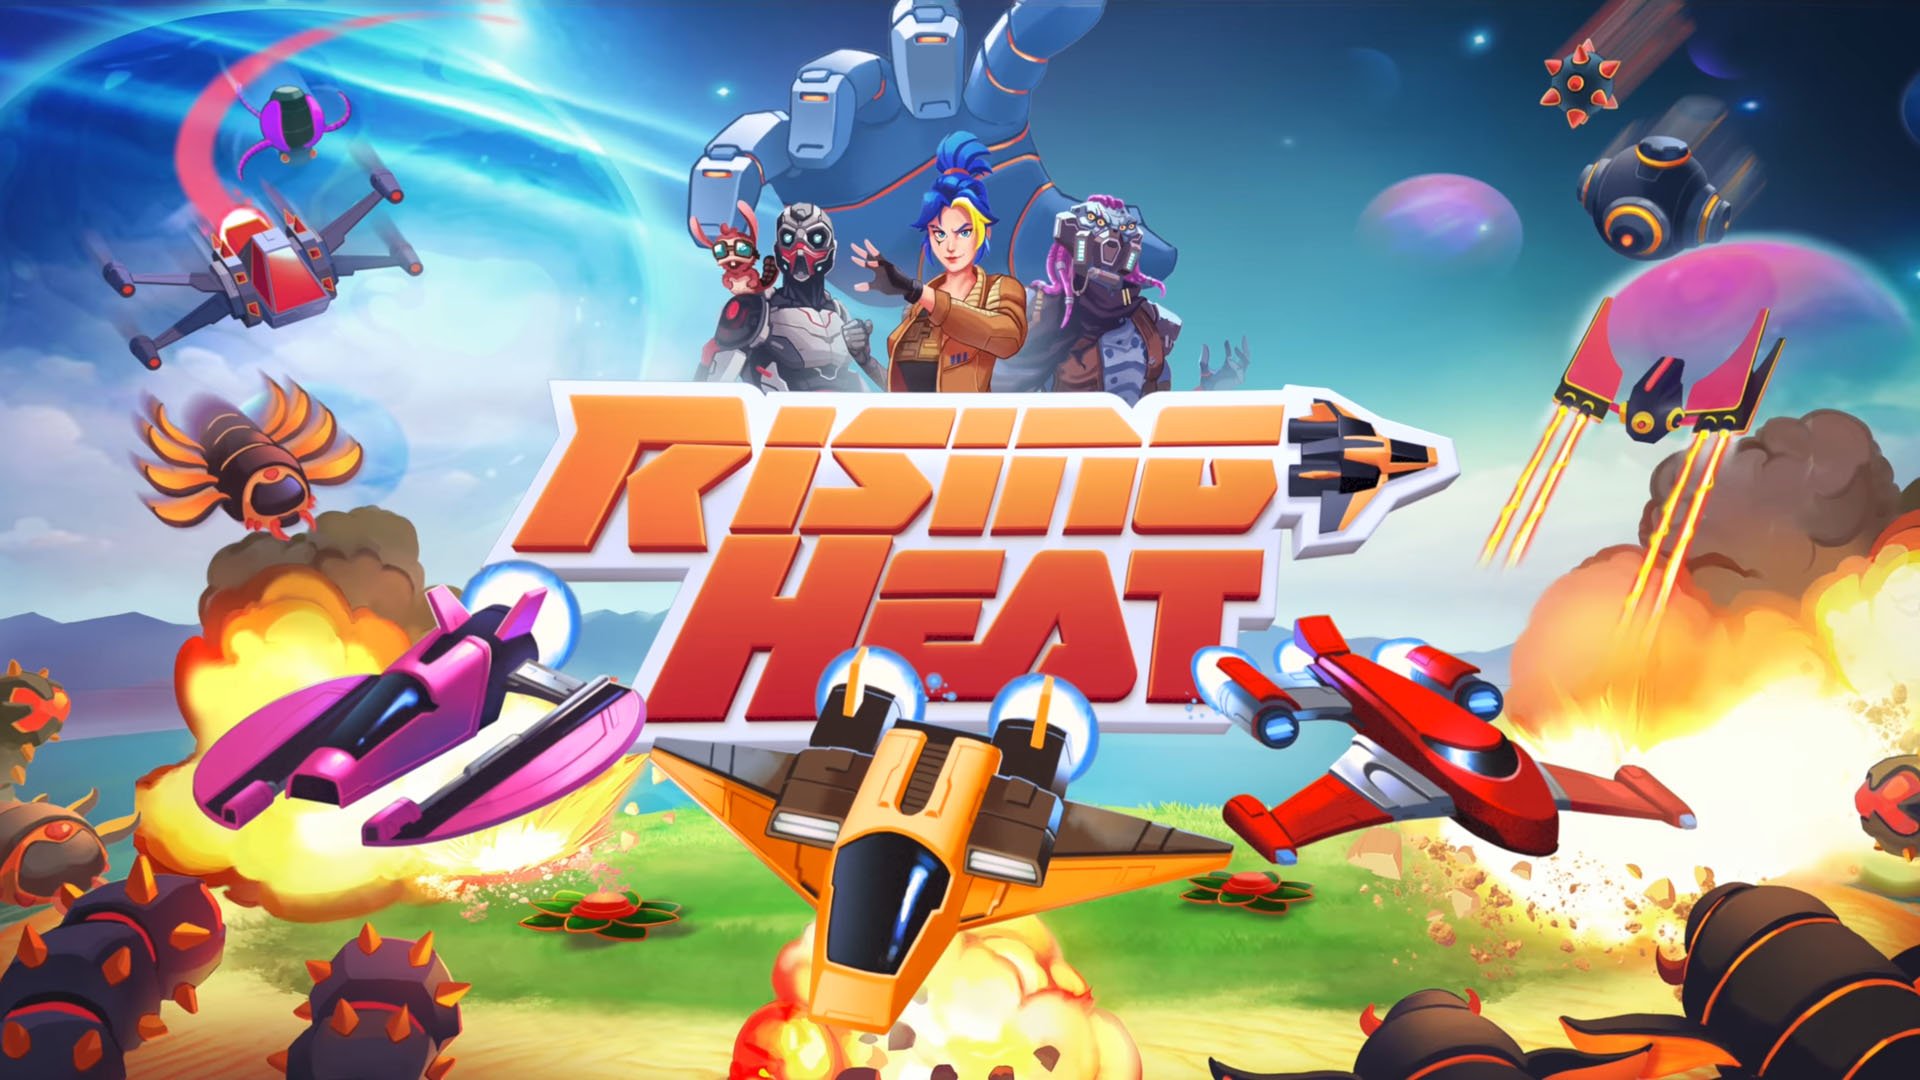 #
      Shoot ’em up action roguelike game Rising Heat announced for PC